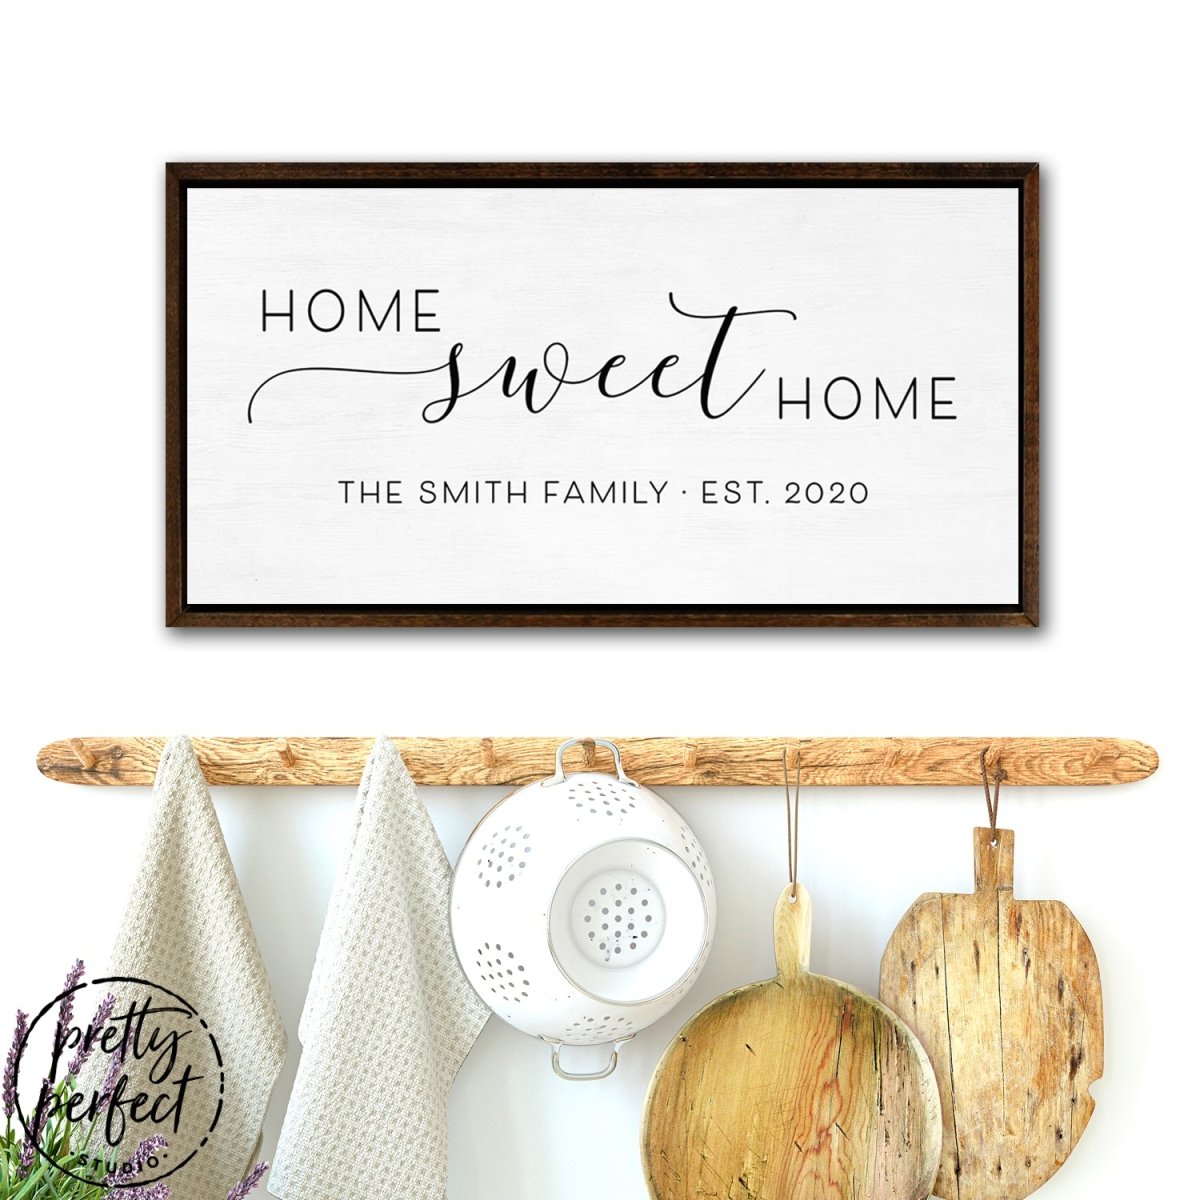 Personalized Home Sweet Home Sign Hanging on Wall in Dining Room - Pretty Perfect Studio